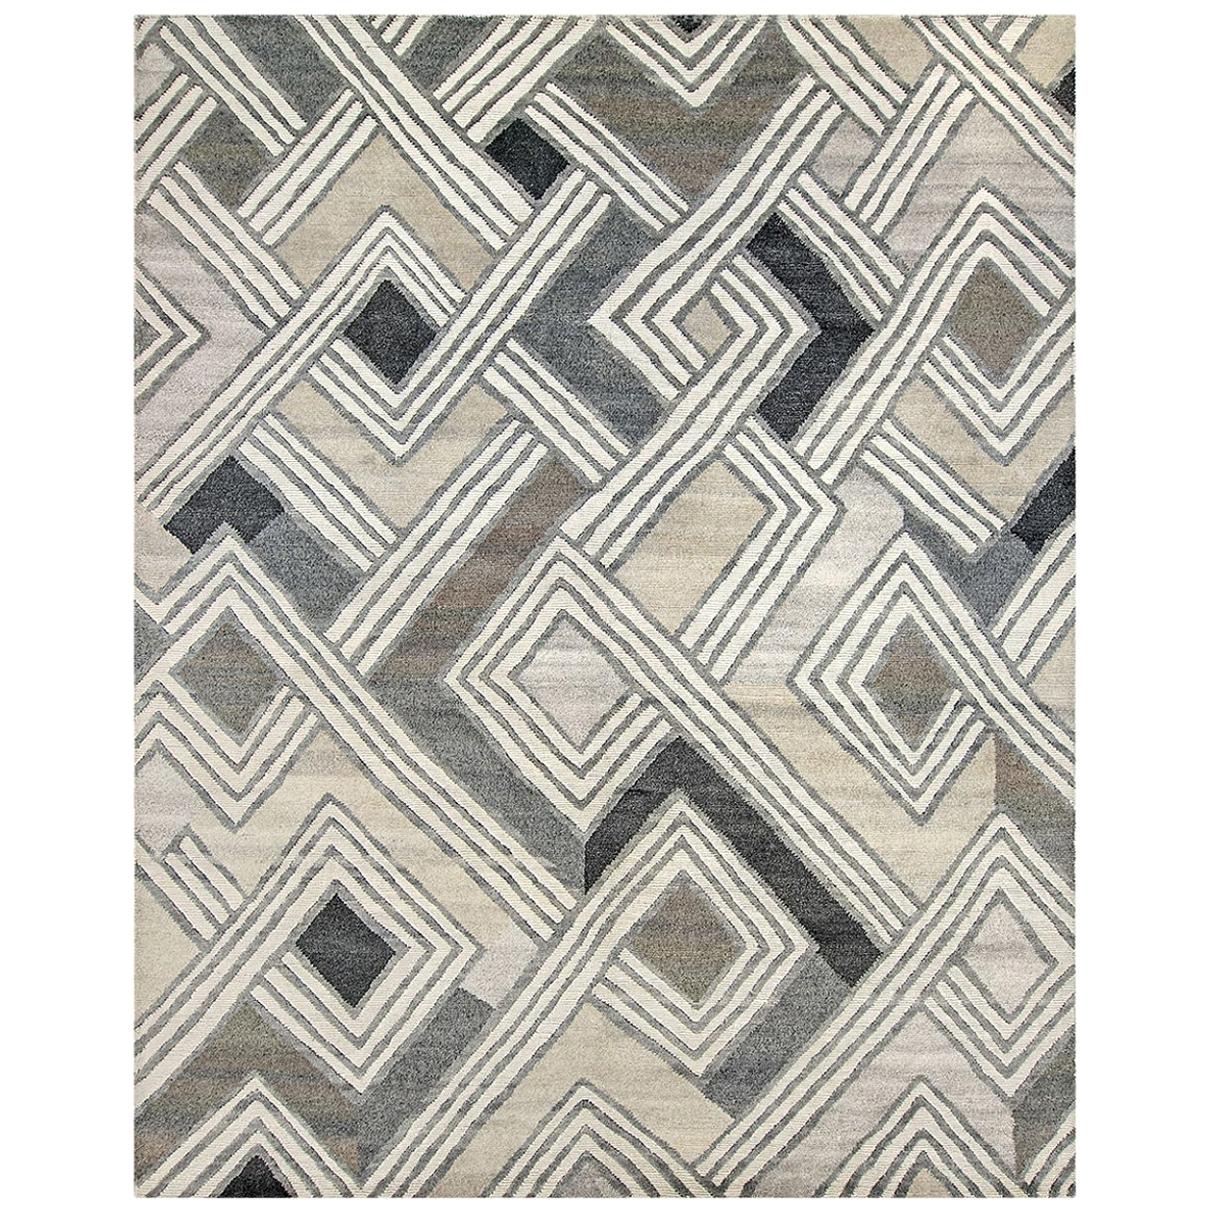 Nazmiyal Collection African Retro Rug. Size: 9 ft x 12 ft